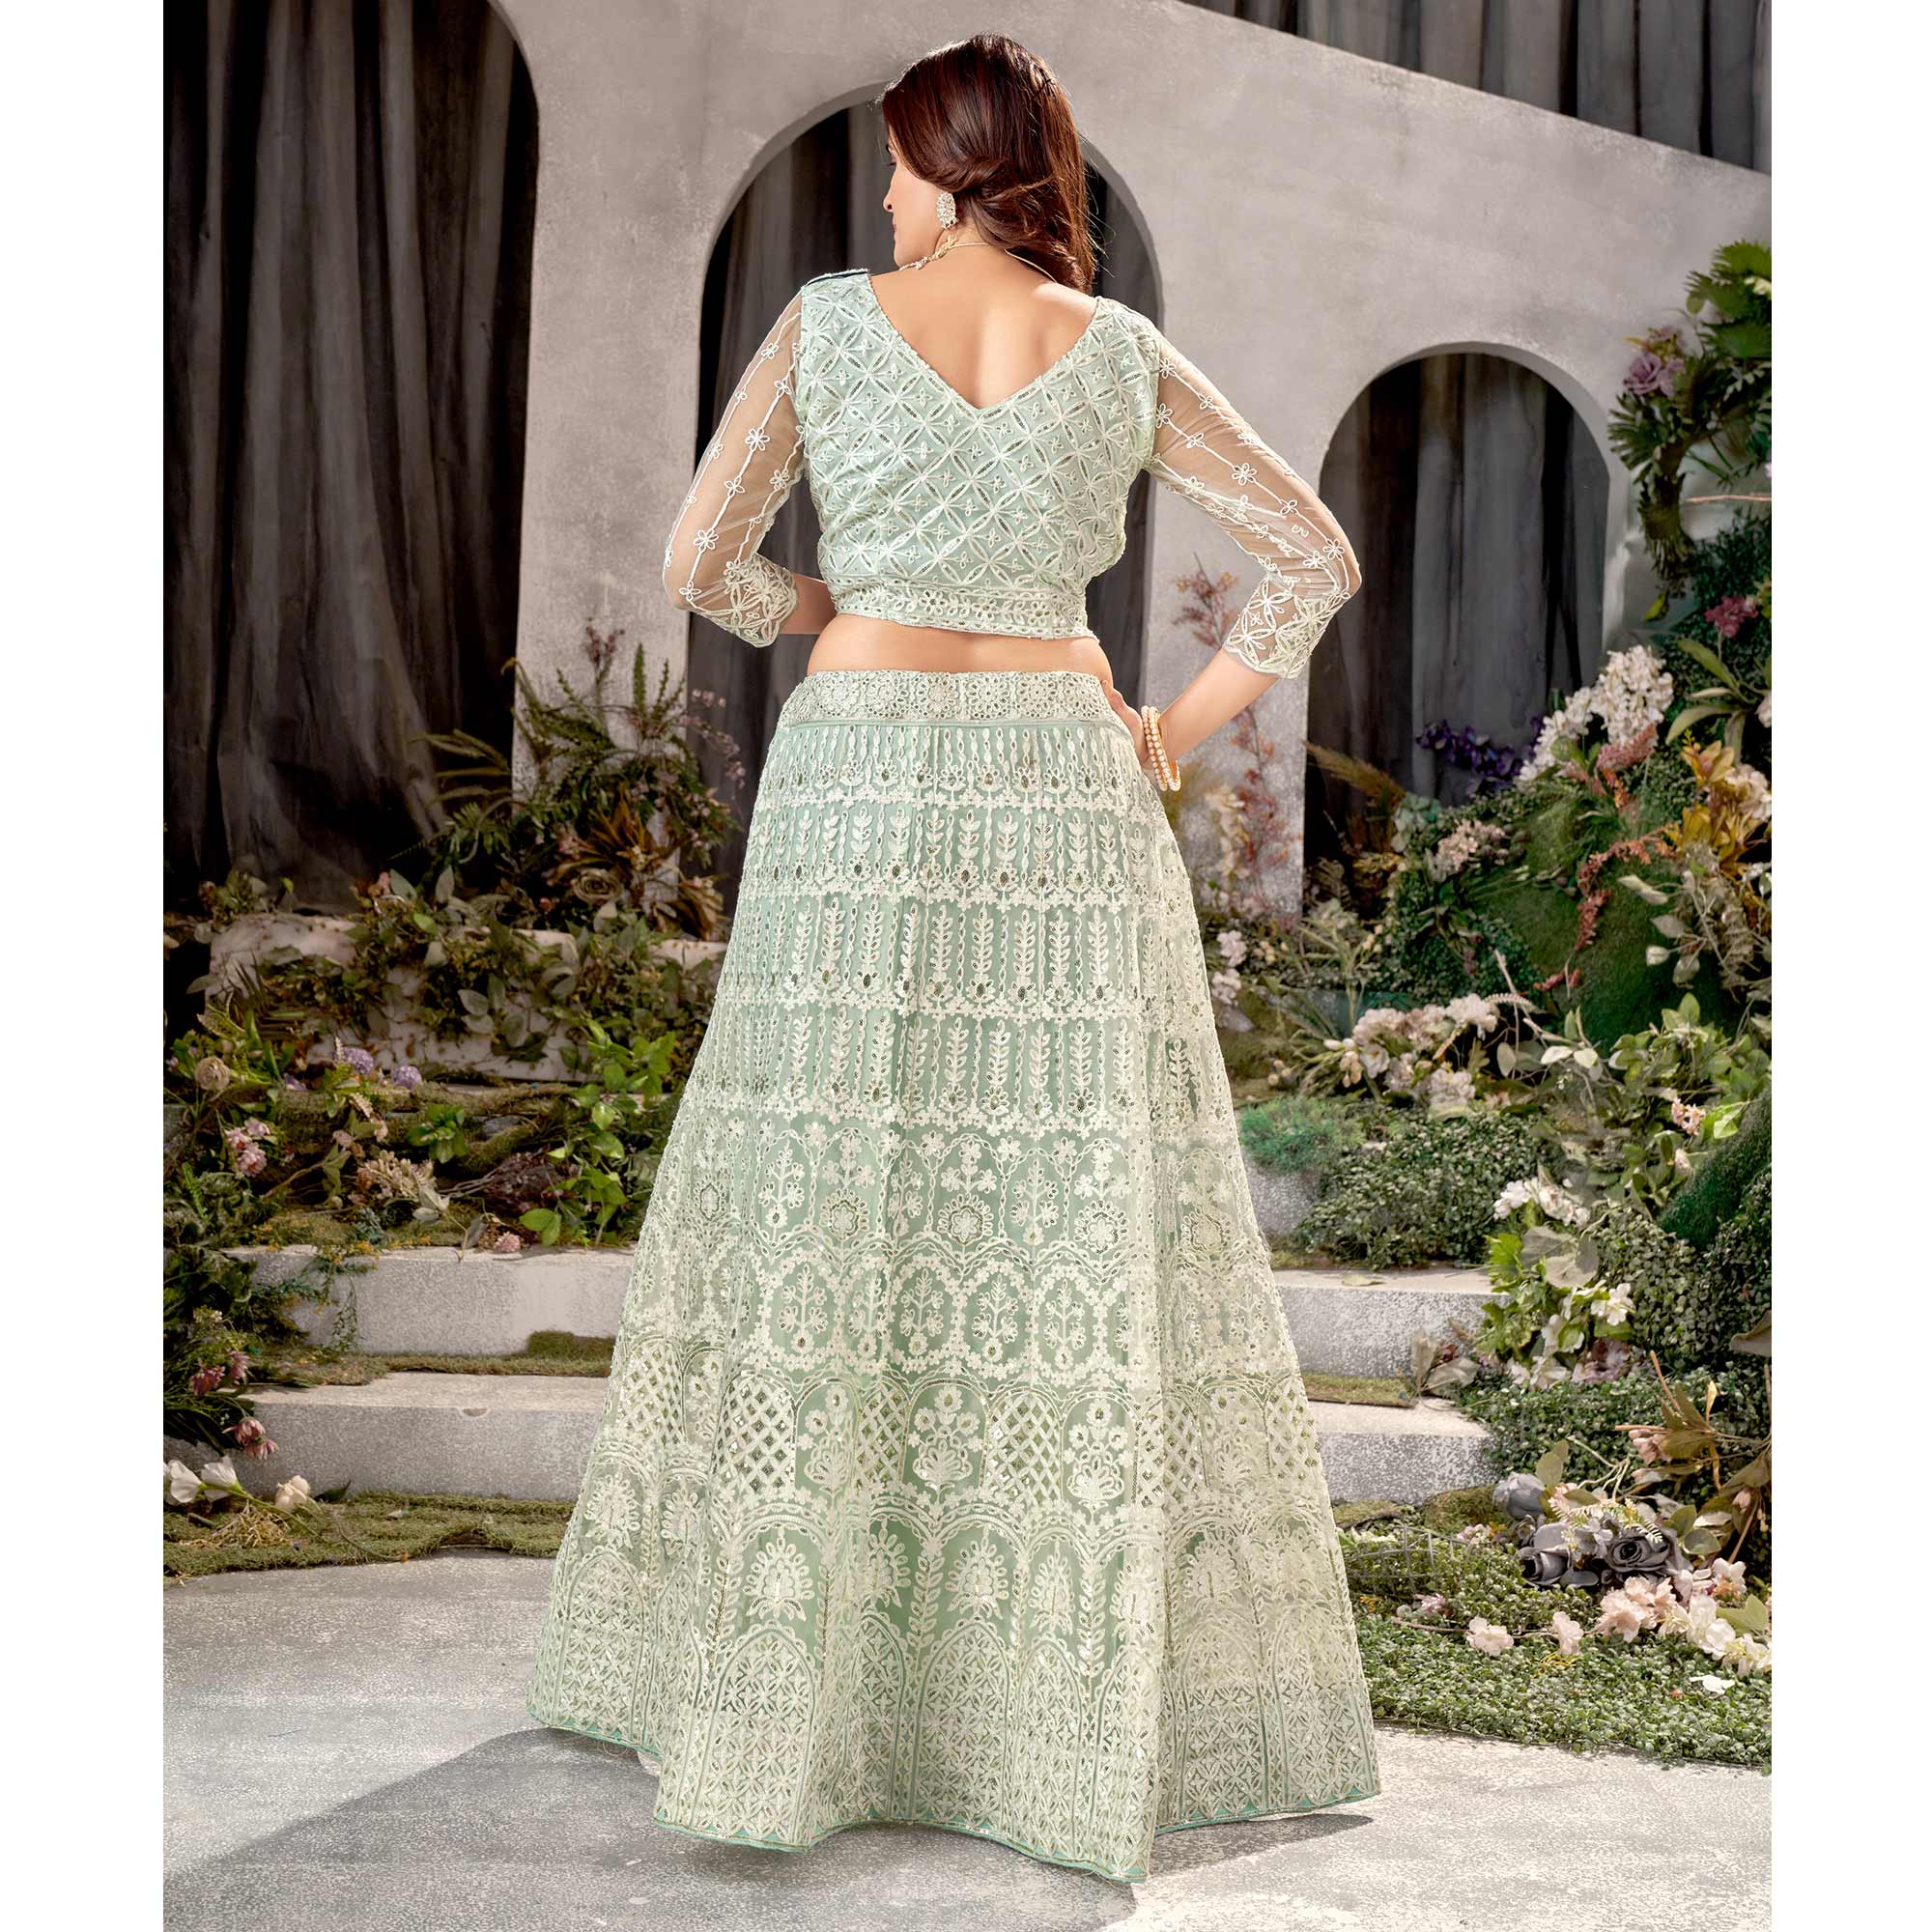 Green Floral Sequins Embroidered Net Lehenga Choli